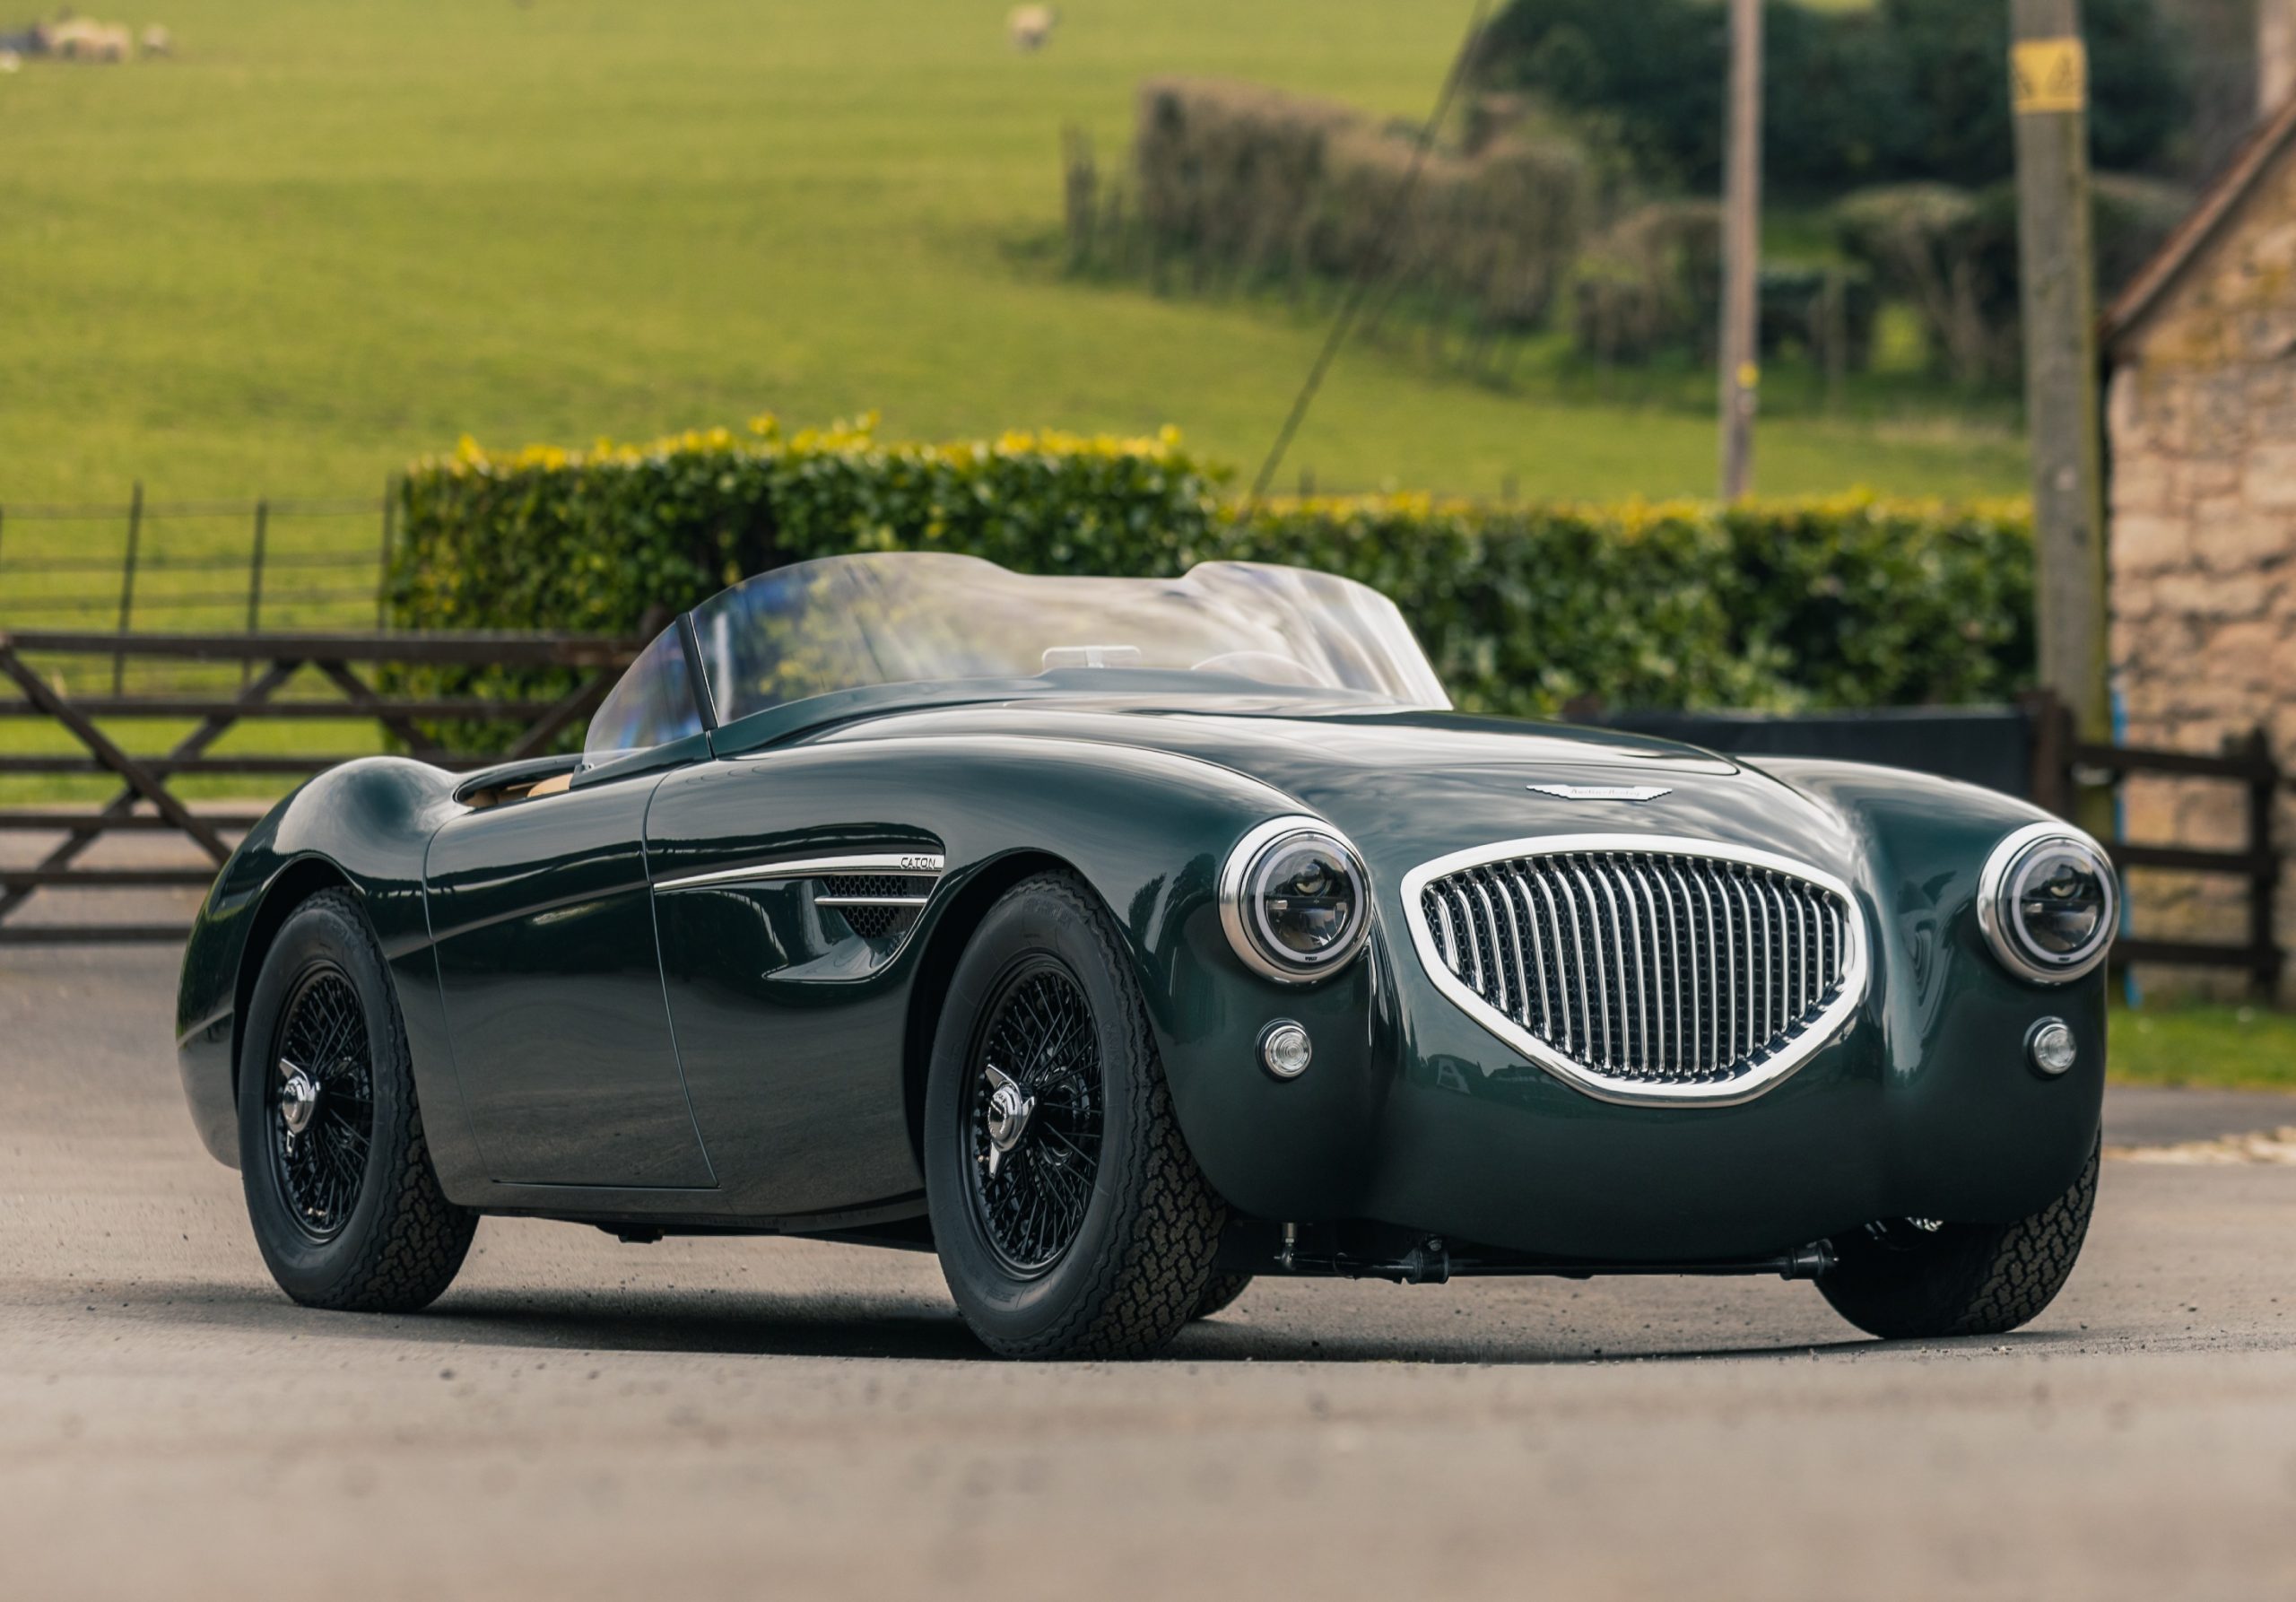 Austin-Healey powers back into production